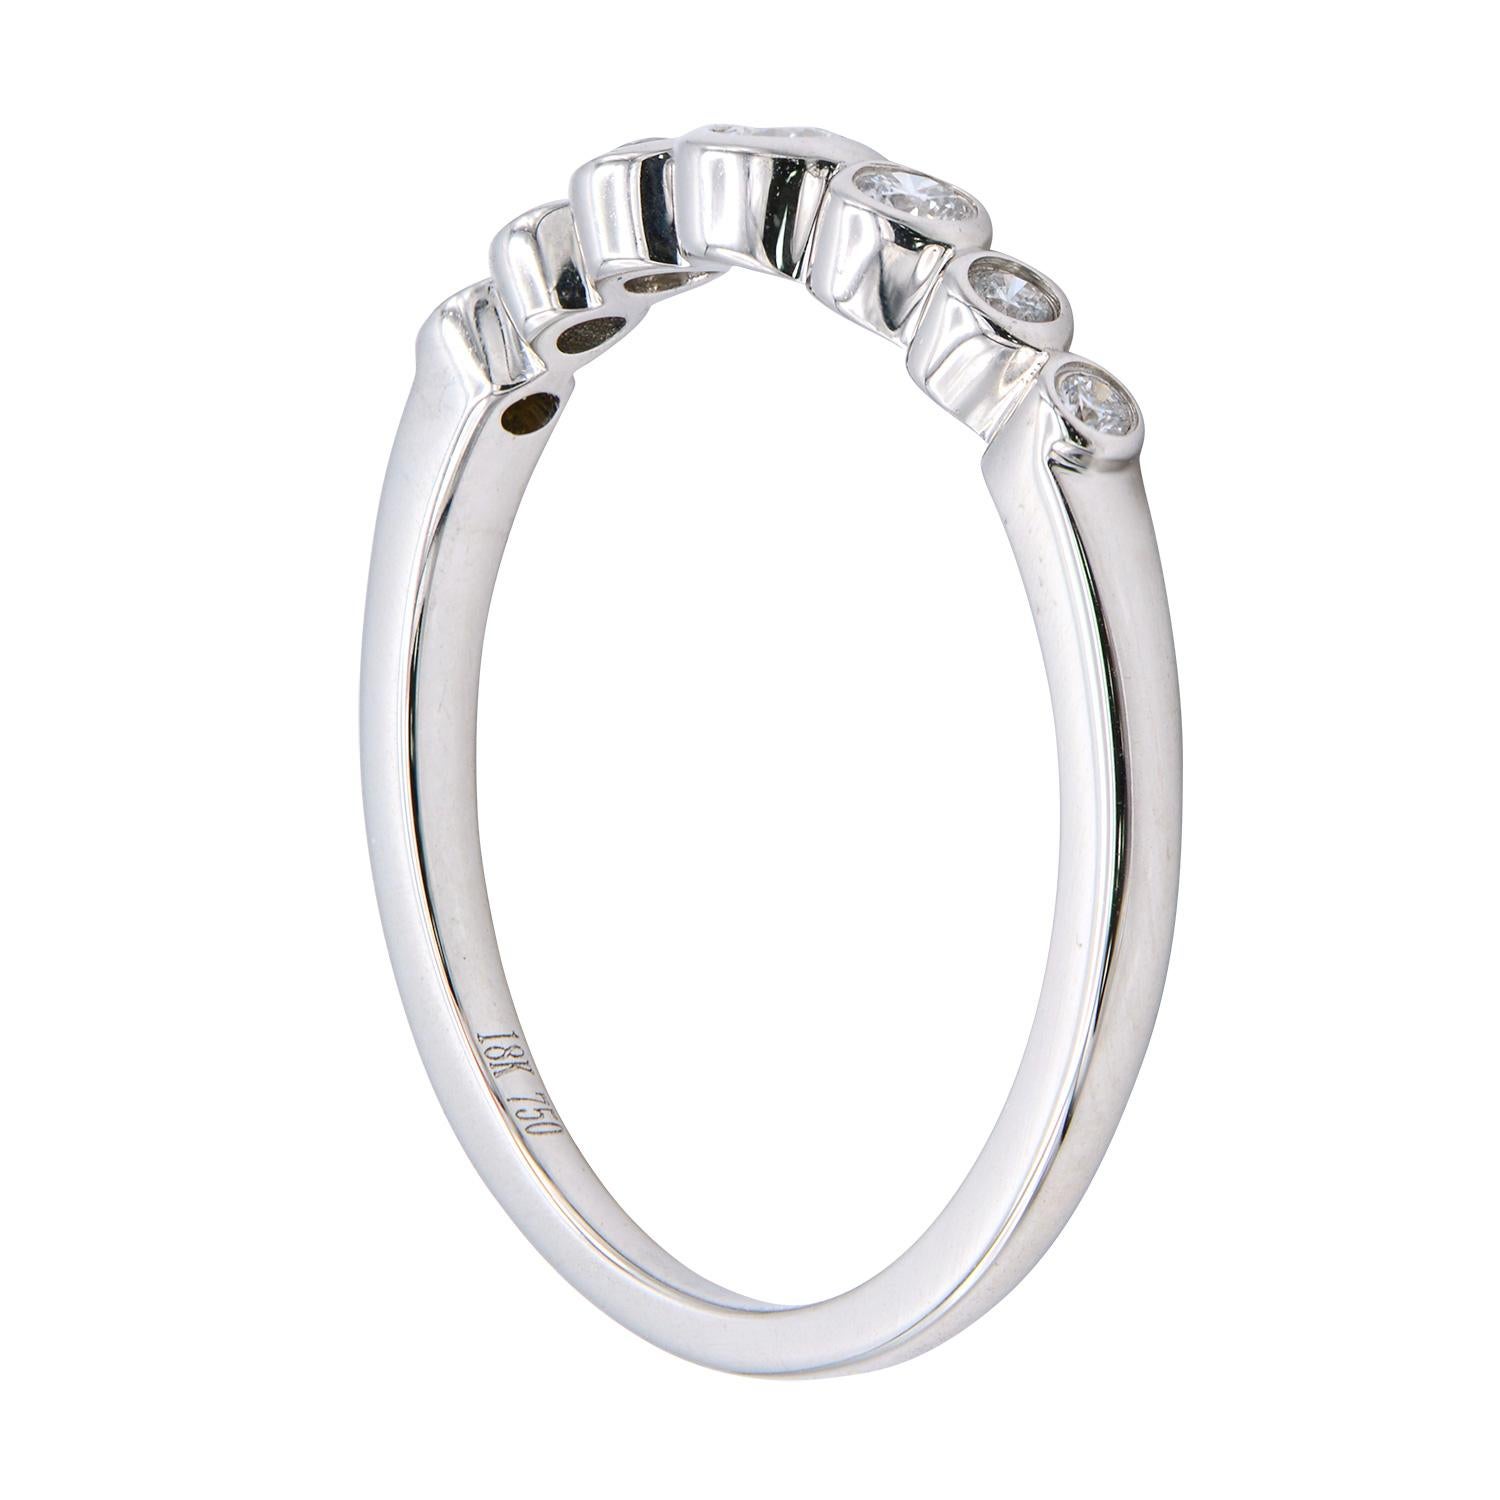 This beautiful ring contains 7 diamonds that are graduated towards the center diamond. They are VS2, G color and total 0.16 carats. They are set in a bezel style in 18 karat white gold totaling 2.1 grams. This classic ring is simple and elegant and